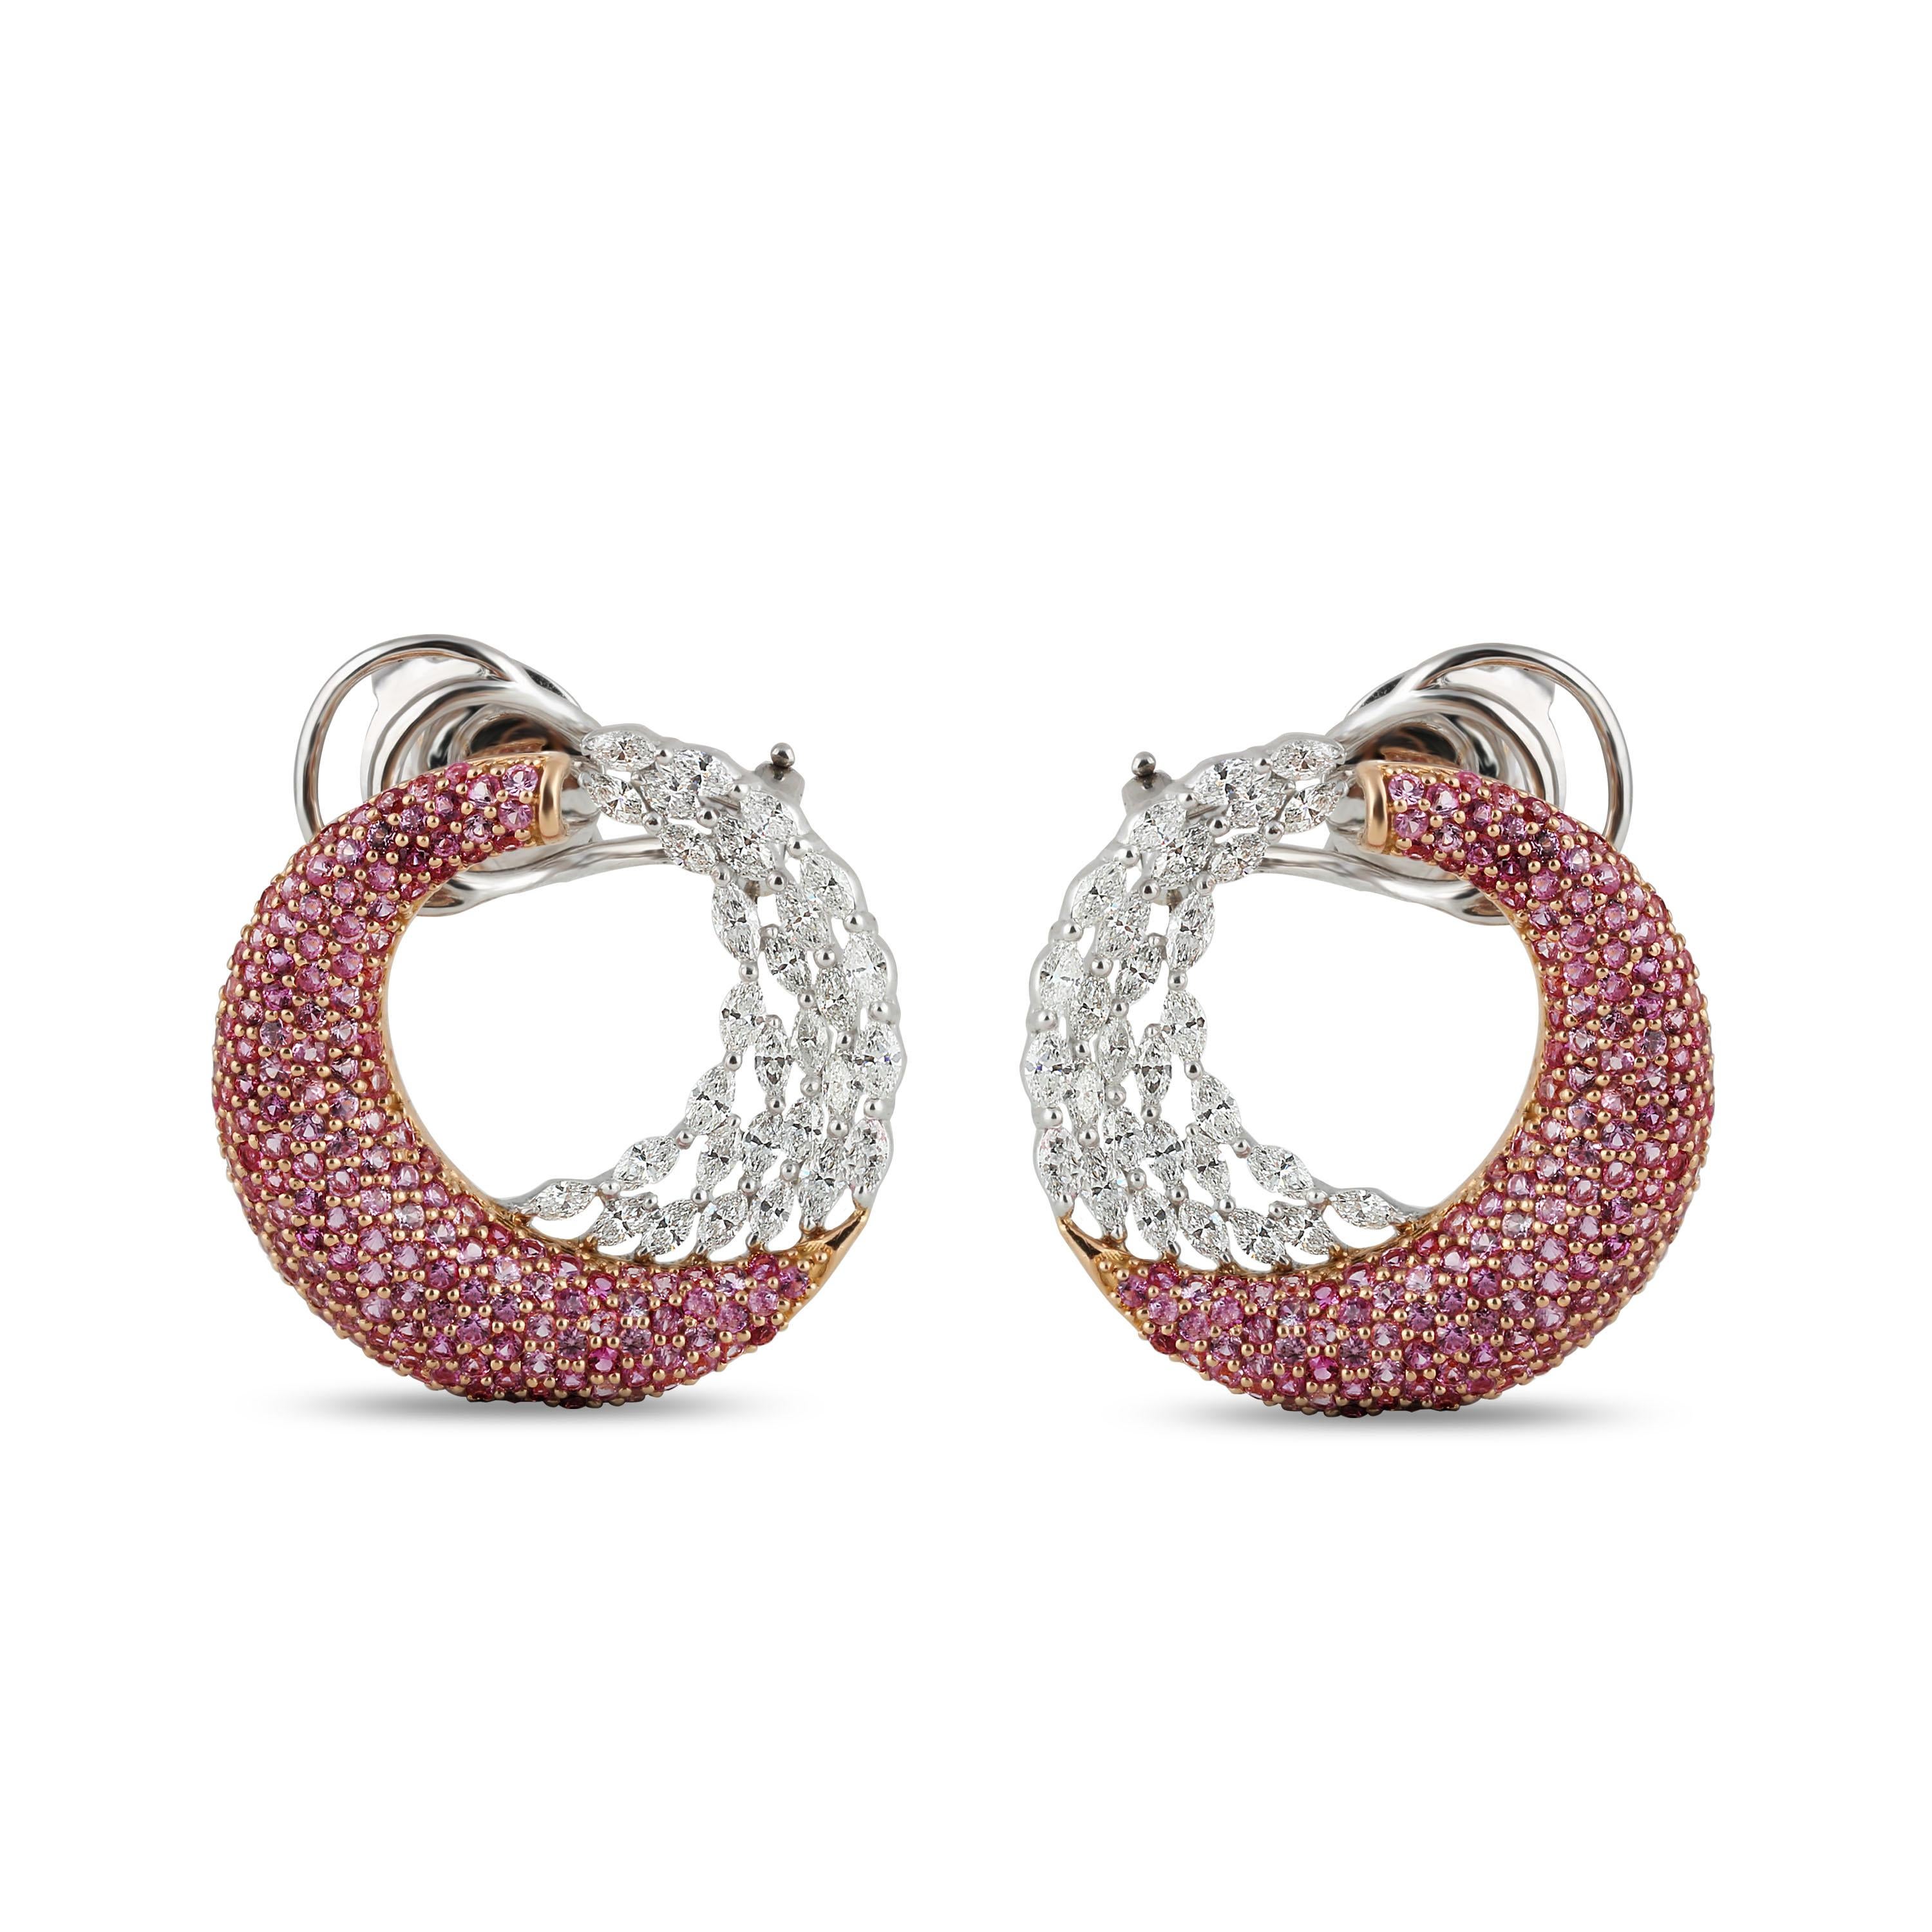 Brilliant cut diamonds and pink sapphire earrings 

It is the ingenious amalgamation of meticulously selected brilliant cut marquise diamonds and pink sapphires that gives these broad hoops its aura of unique artistry. The 320 stones have been used